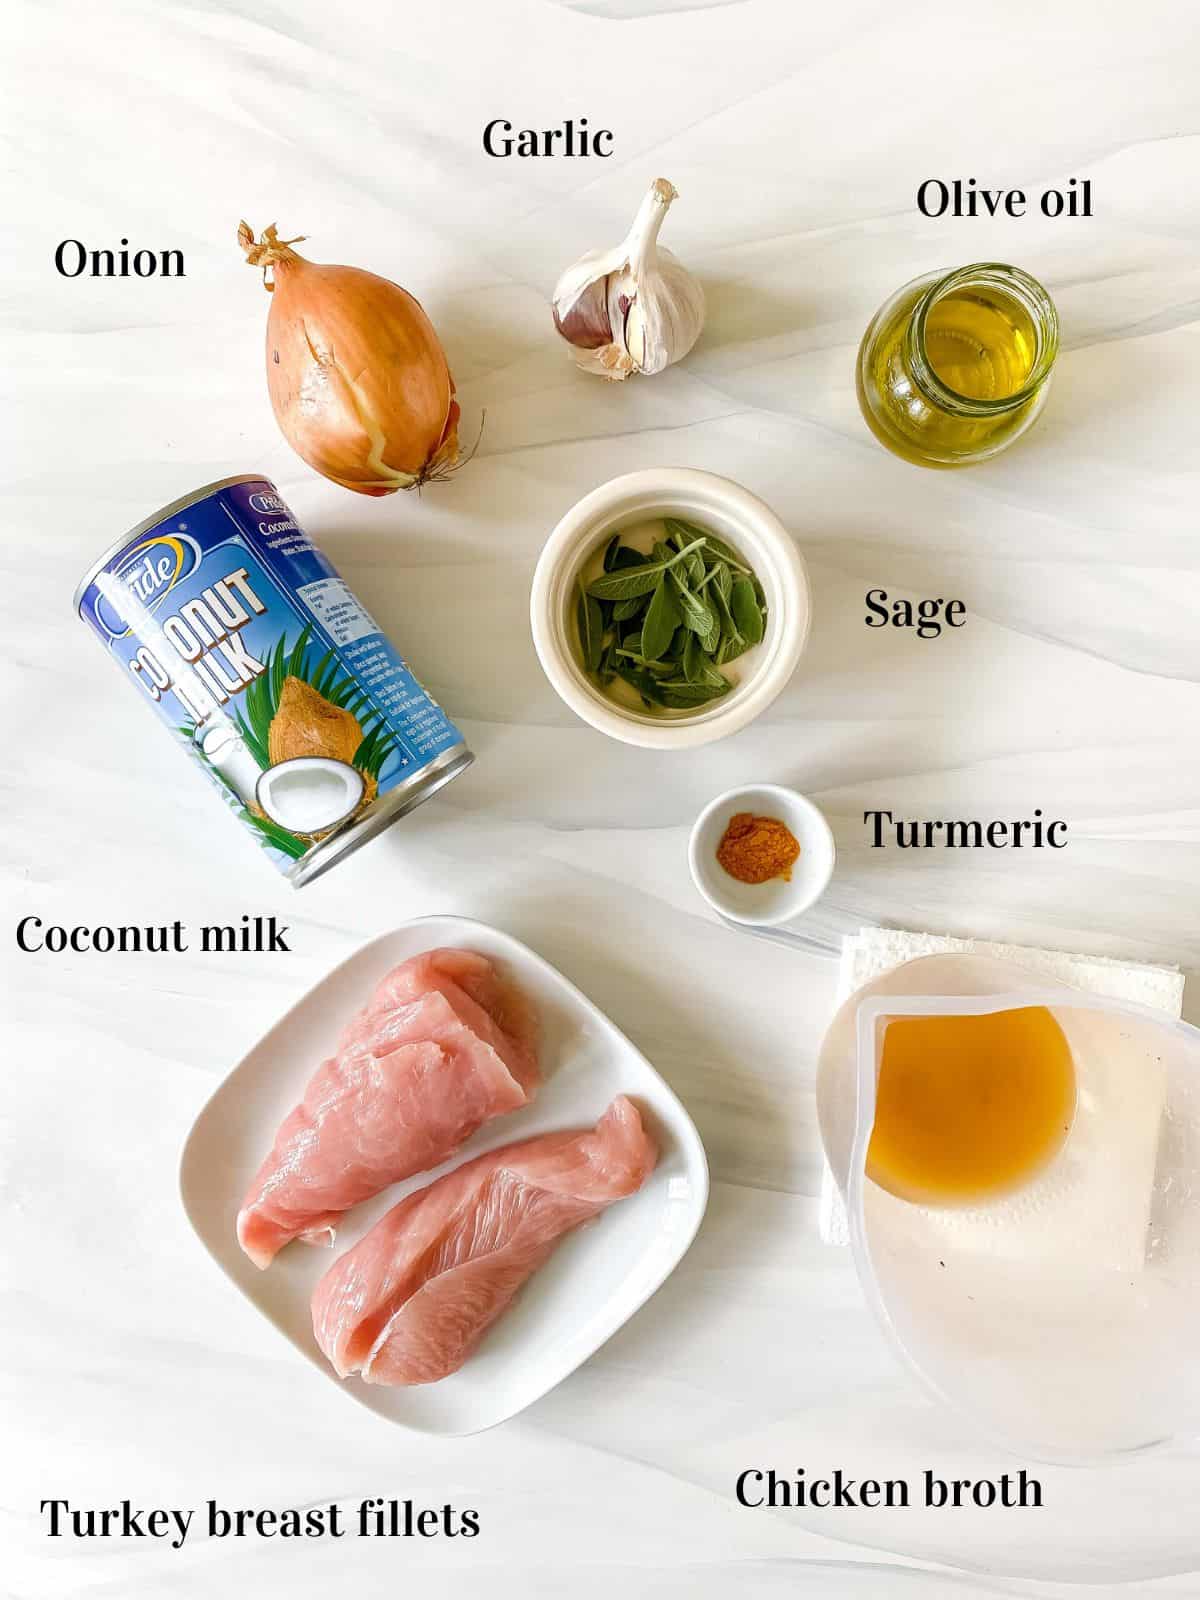 all the ingredients for turkey with sage cream sauce.